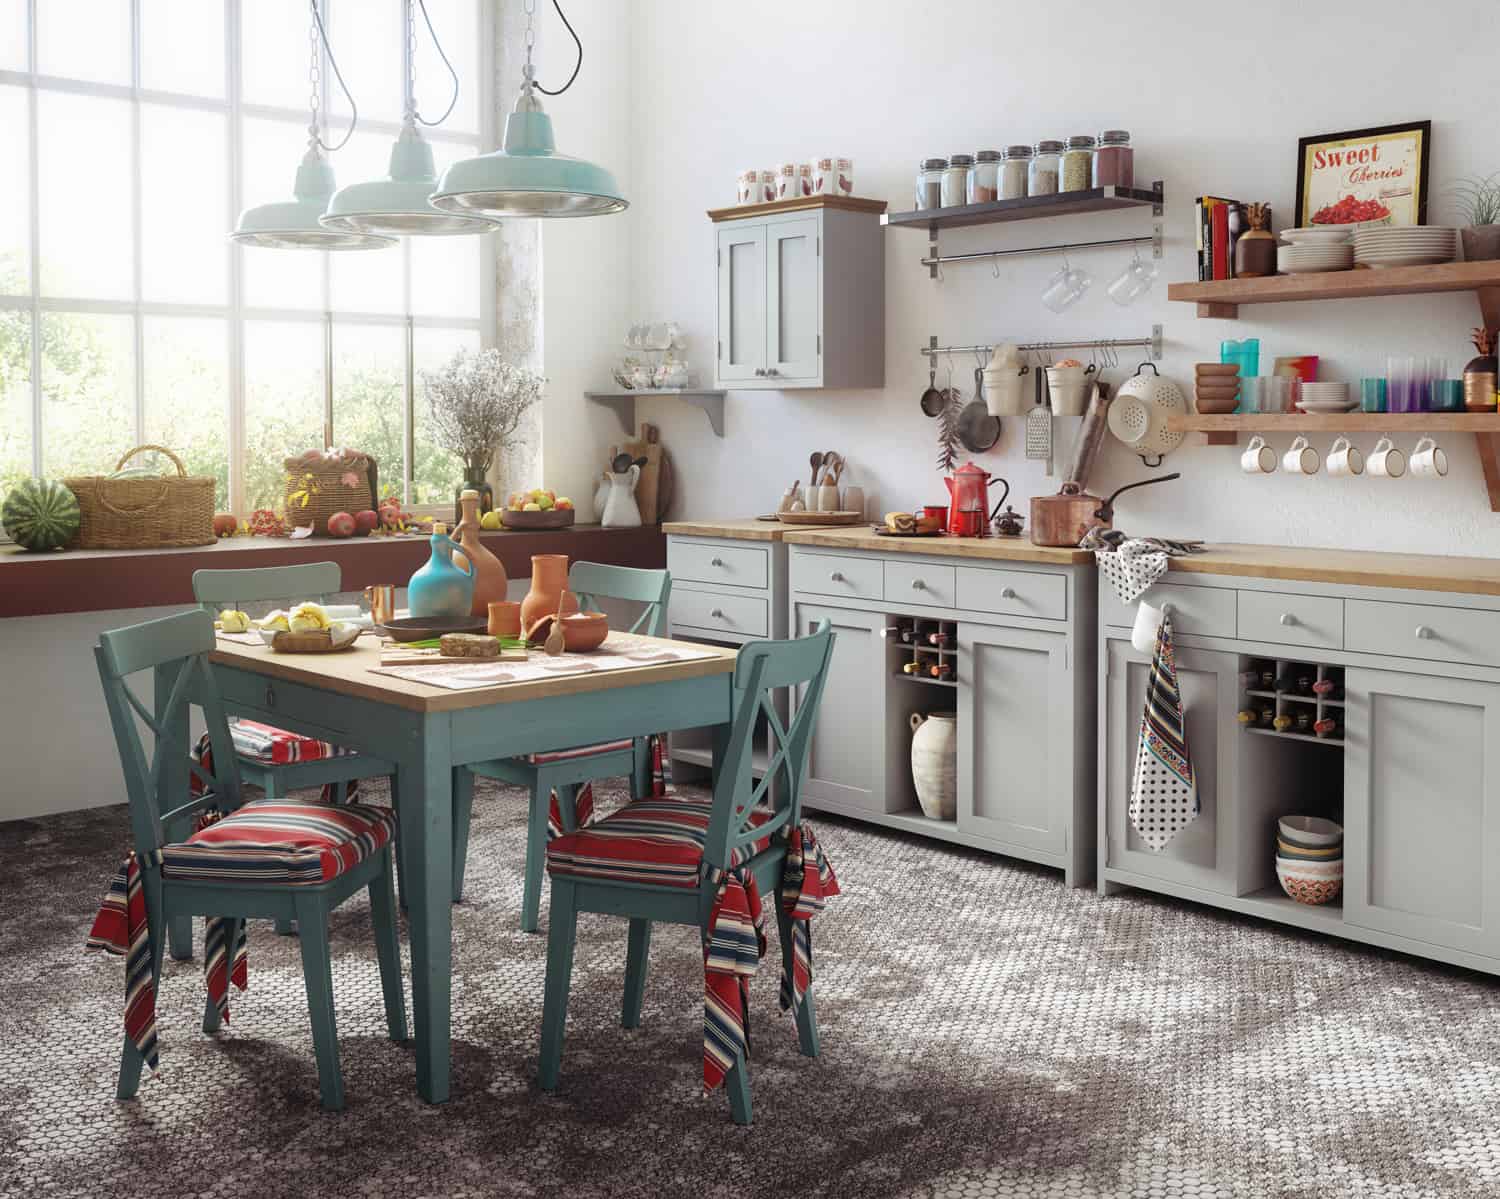 cozy and rustic domestic kitchen interior, with a lot of vintage ethnic props and kitchen utensils.